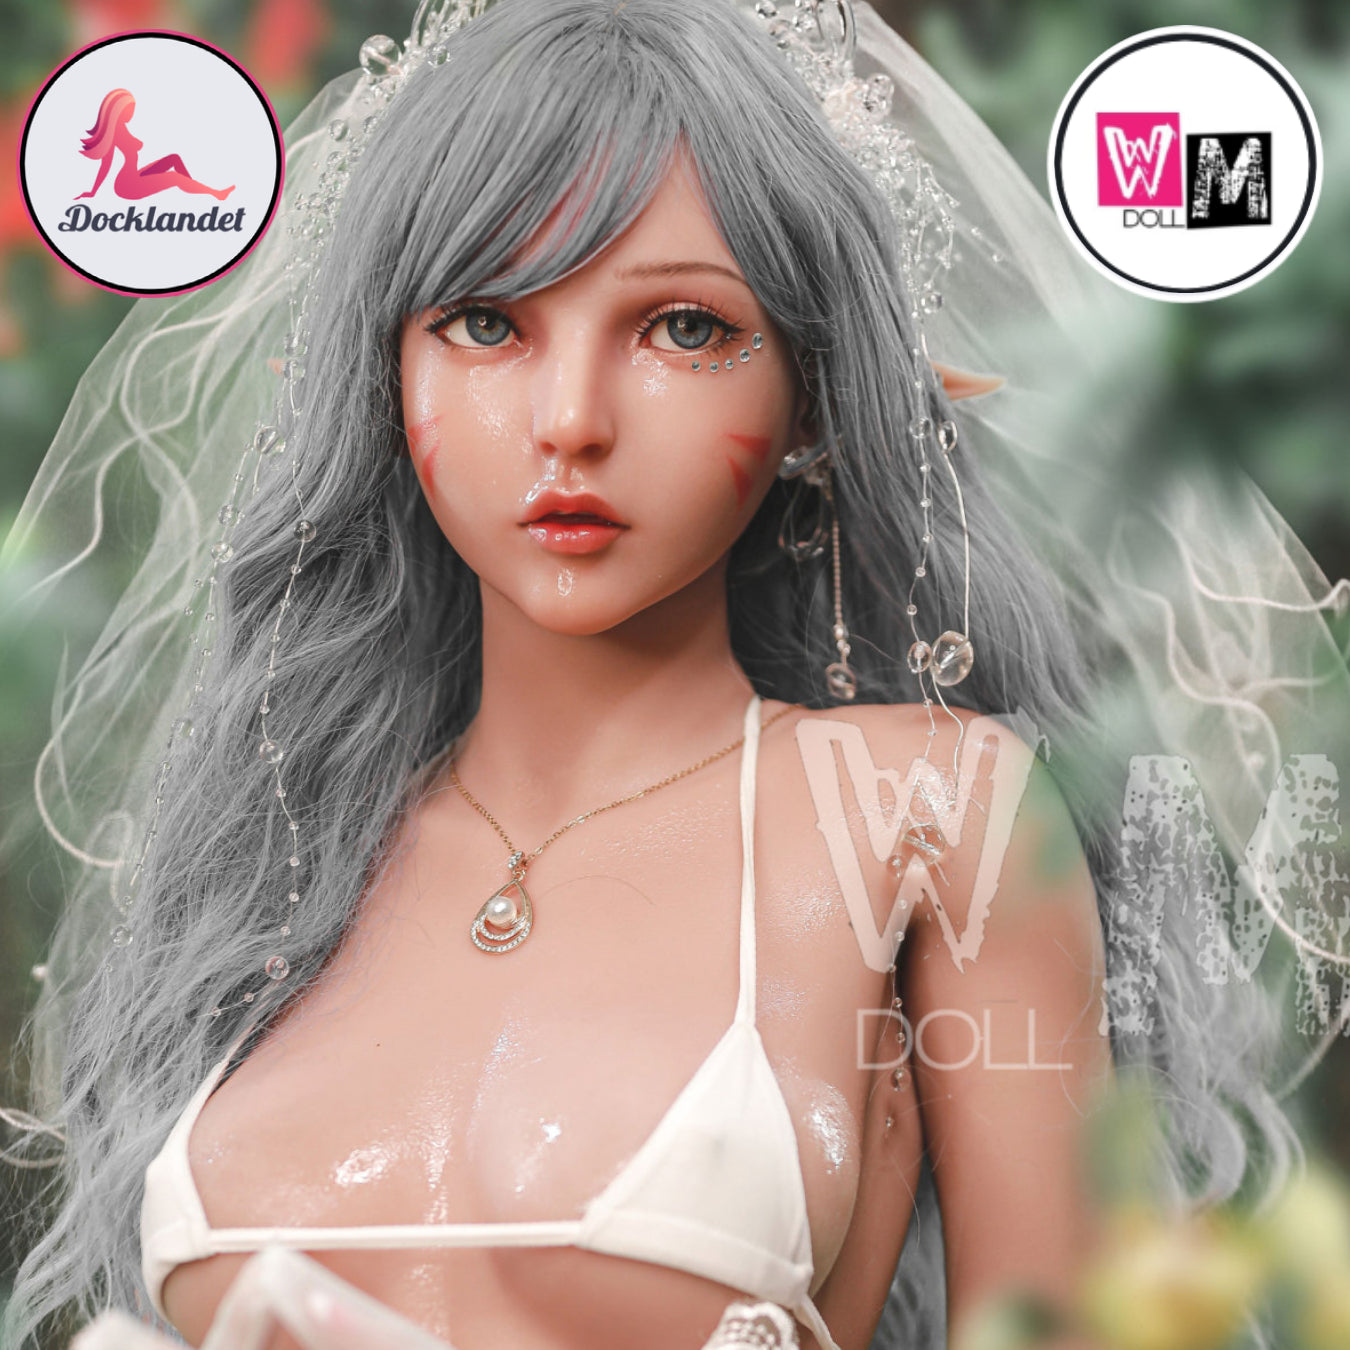 WM-Doll one of the first manufacturers of sex dolls. WM Doll pioneered in the production of quality sex dolls in China and to this day, it remains one of the leaders in the industry. WM Dolls uses high quality TPE from the US and offers a wide choice of sex dolls: Asian, Caucasian, Black dolls... WM-Doll (also known as WM Doll) is one of the most famous sex doll / real doll brands in the world. When you buy a doll from WM you can be sure of its quality, their sex dolls feature a fully articulate metal steel frame and a realistic woman-like skin. They also offer a large variety of customizable options (movable shoulder, built in or insert vagina, enhanced mouth, standing foot etc ...). They also provide the heating feature (torso temperature can be warmed up to 37 Celsius,or 98.6 Fahrenheit, the temperature of a real body). Their sex dolls can even moan during intercourse.